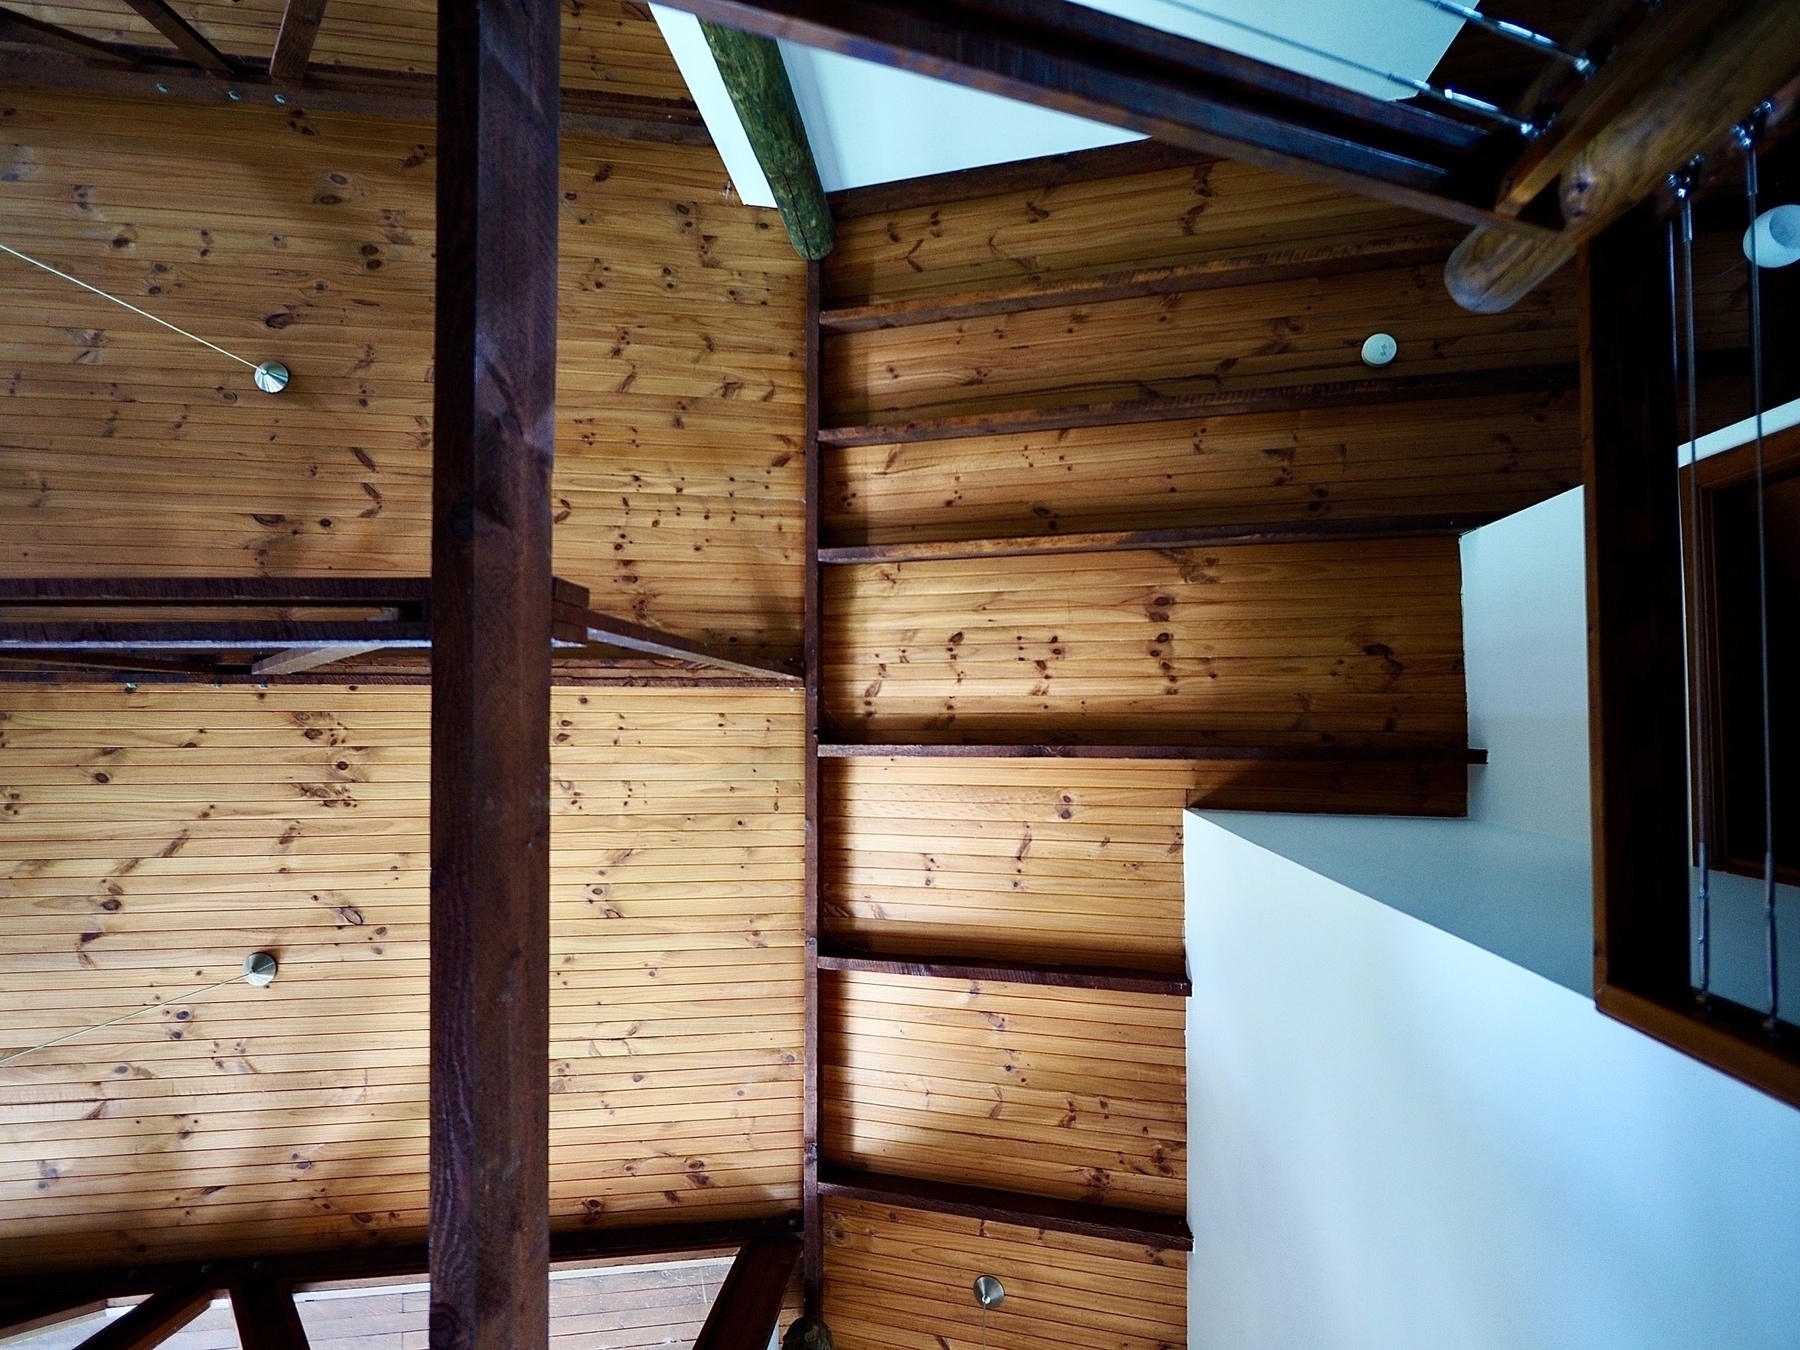 A view directly up at a timber ceiling, with dark supporting beams and white walls